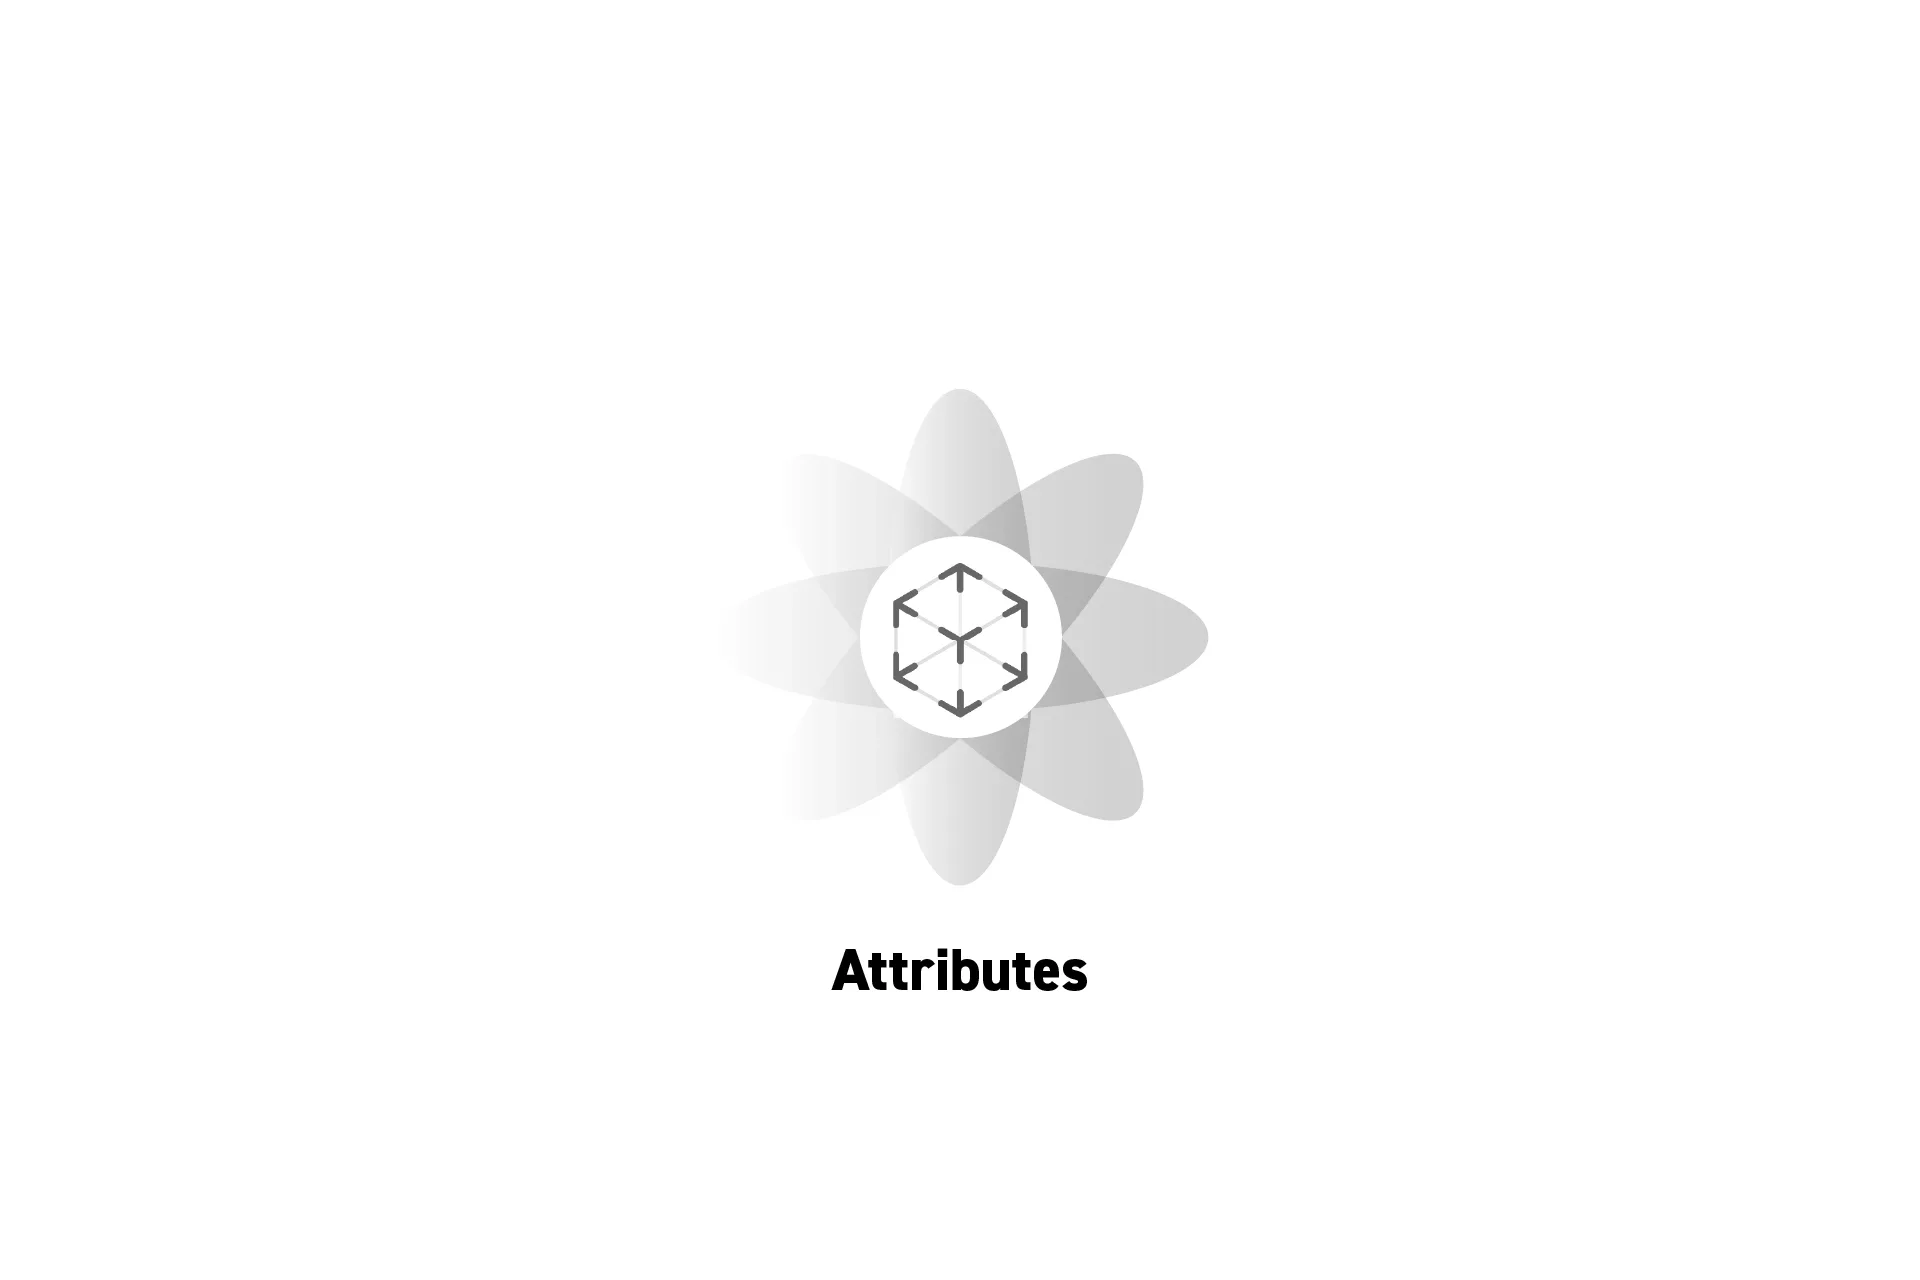 A flower that represents spatial computing with the text "Attributes" beneath it.